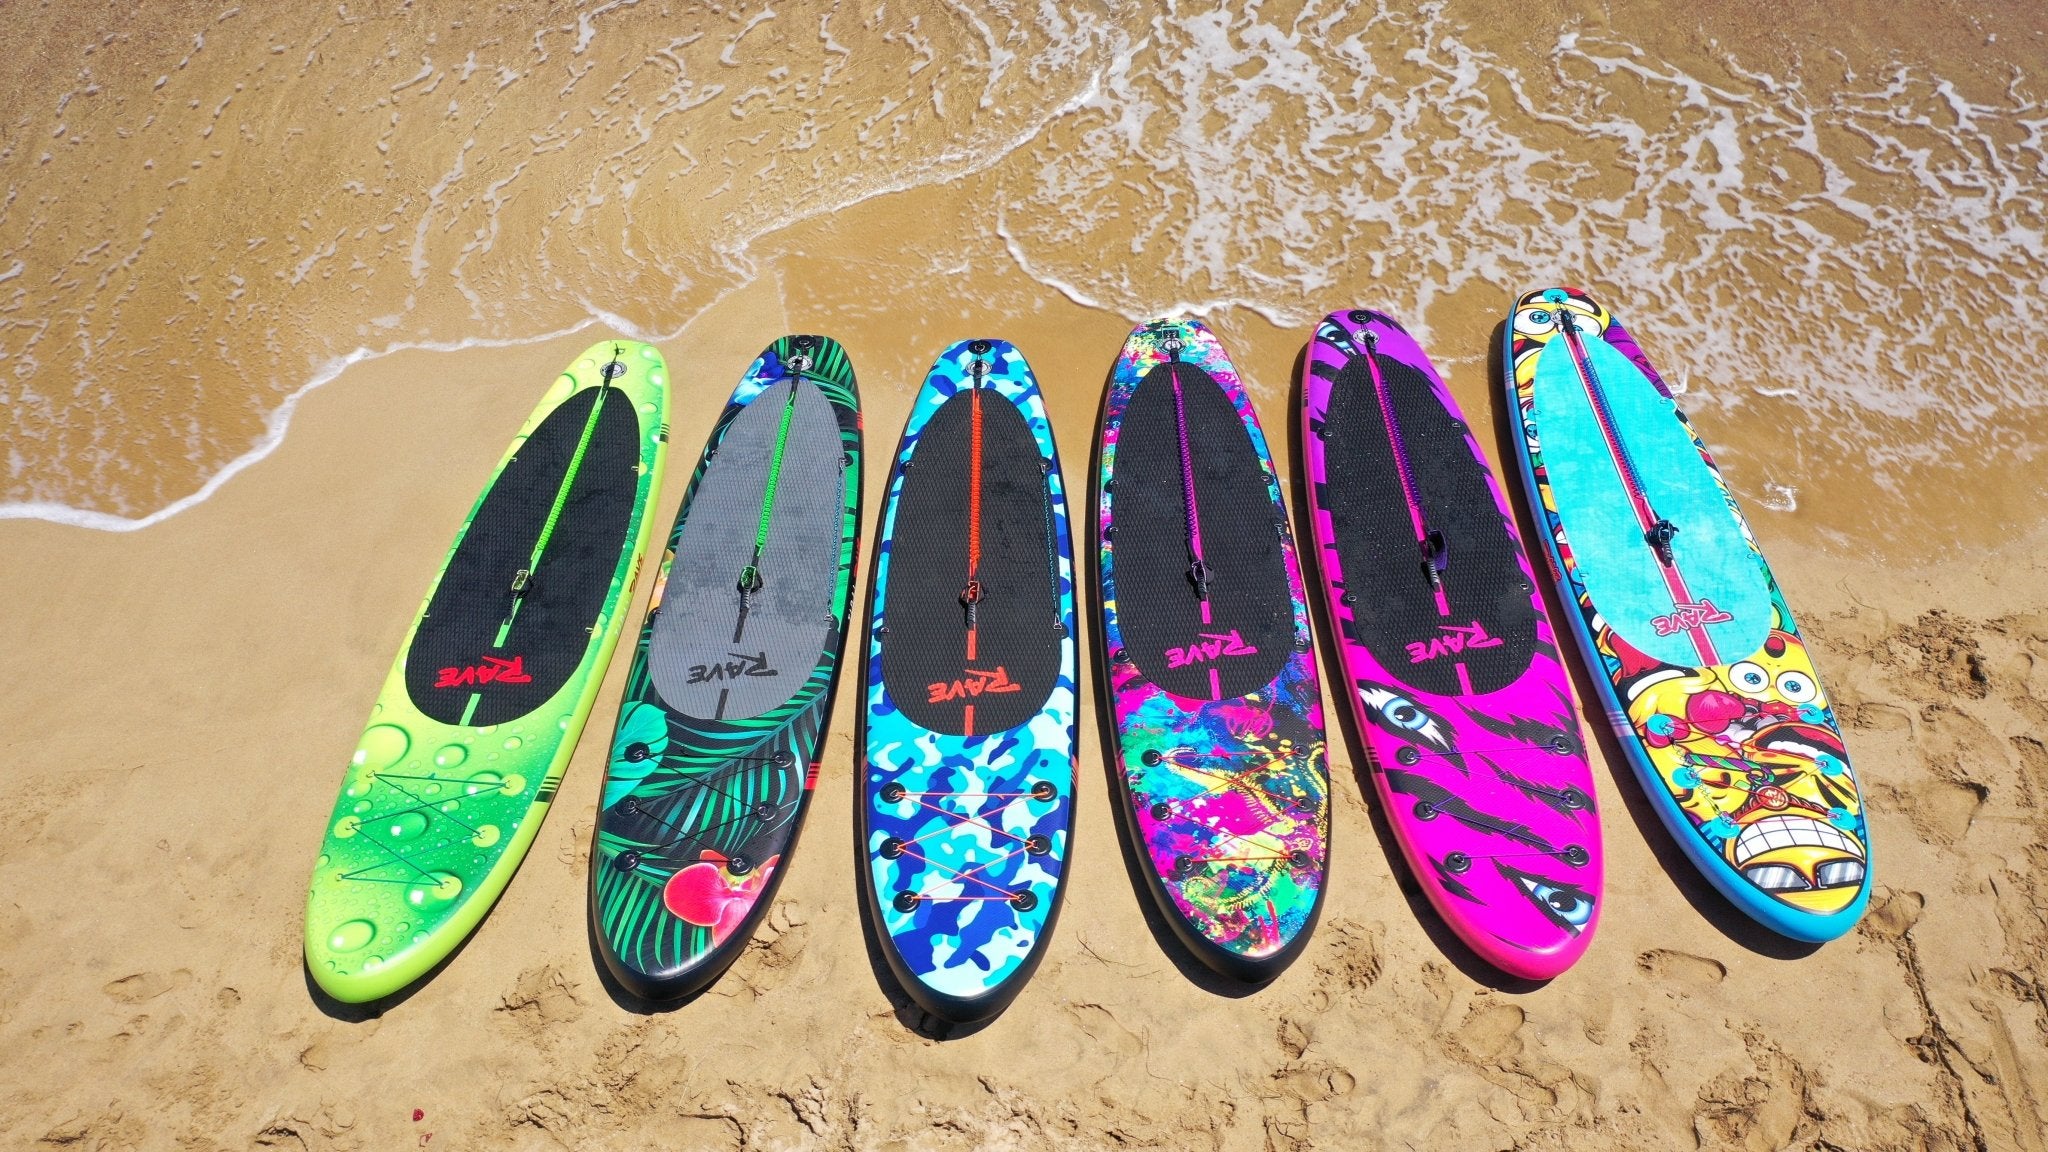 SUP & Paddle Board Accessories UK